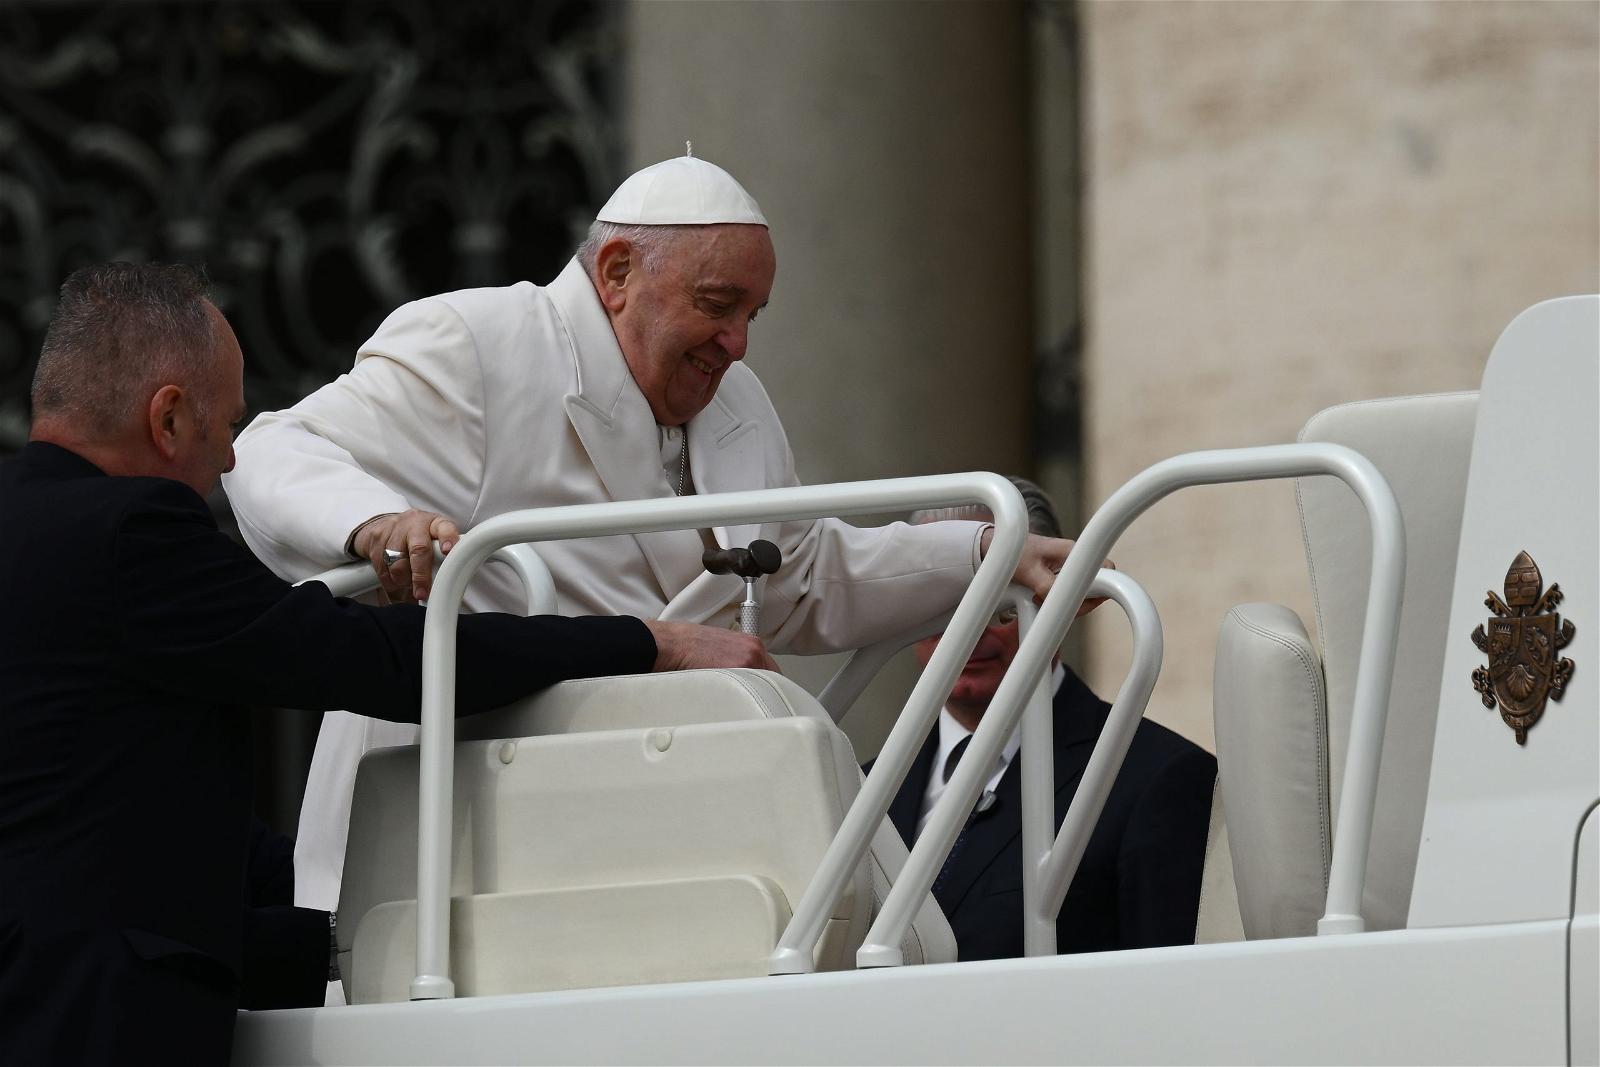 Pope Francis spends night in hospital after surgery